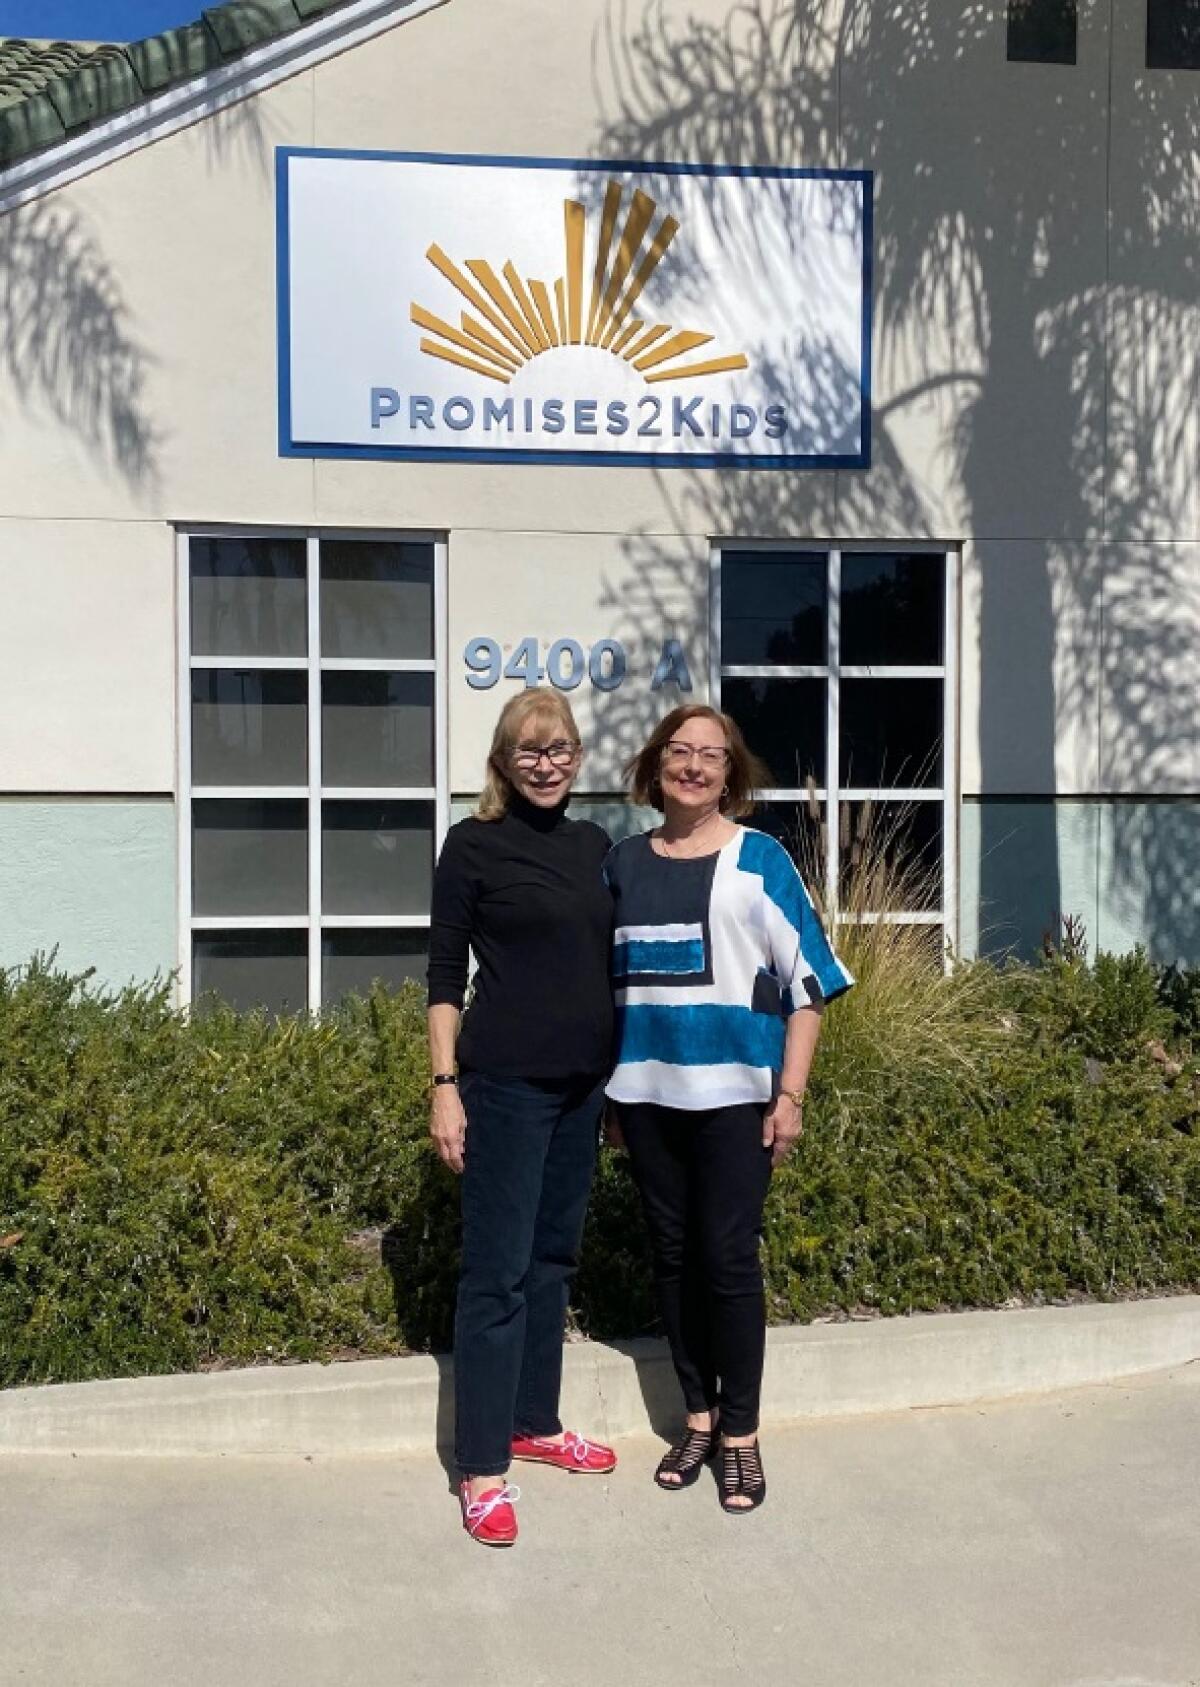 La Jolla residents Norma Hirsh and Renee Comeau founded the Promises2Kids organization 40 years ago.